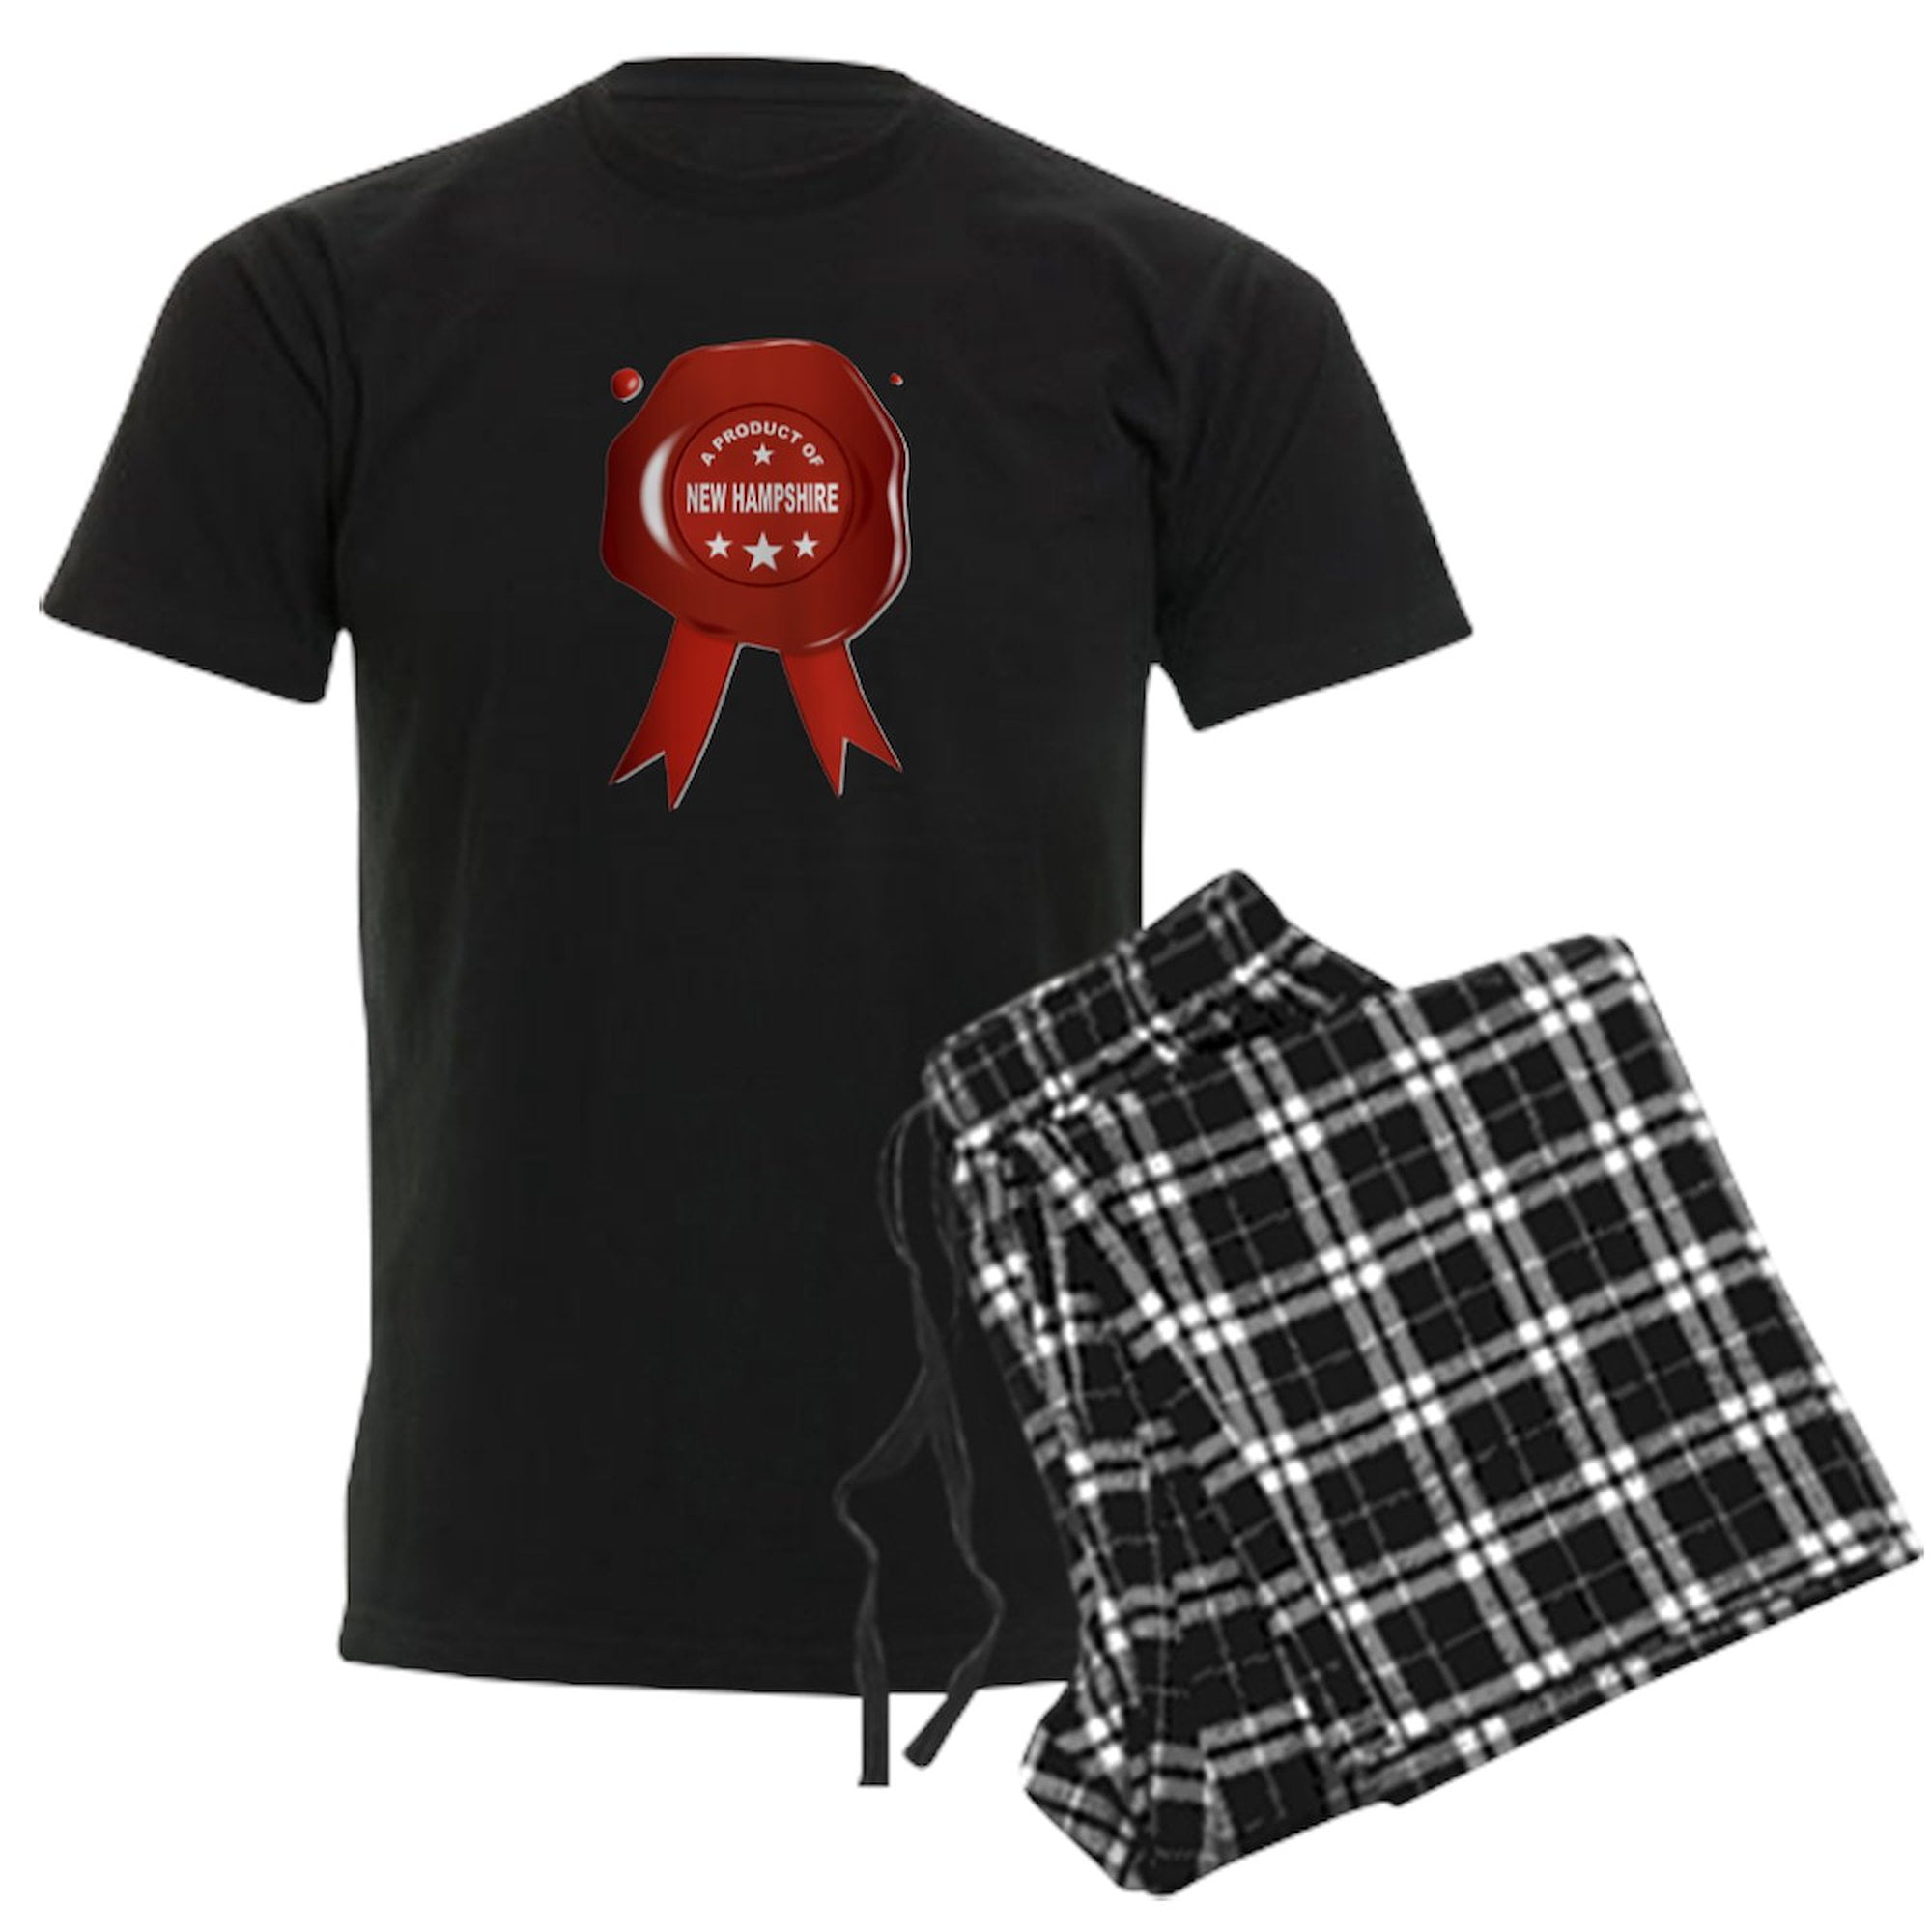 CafePress - A Product Of New Hampshire Pajamas - Men's Dark Loose Fit ...